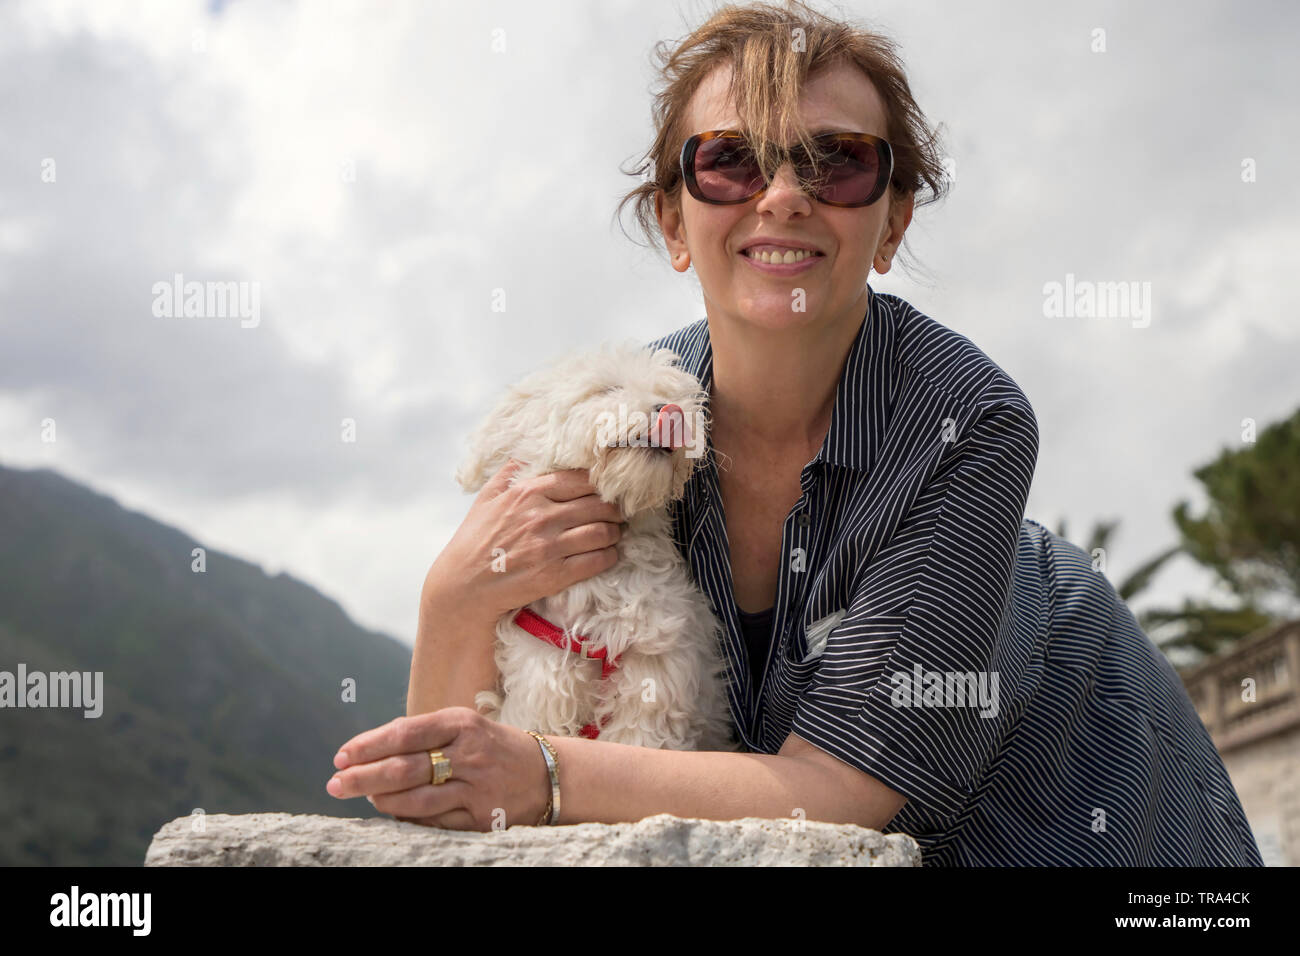 Dobrota, Montenegro, April 27th 2019: Woman posing with her doggy Stock Photo